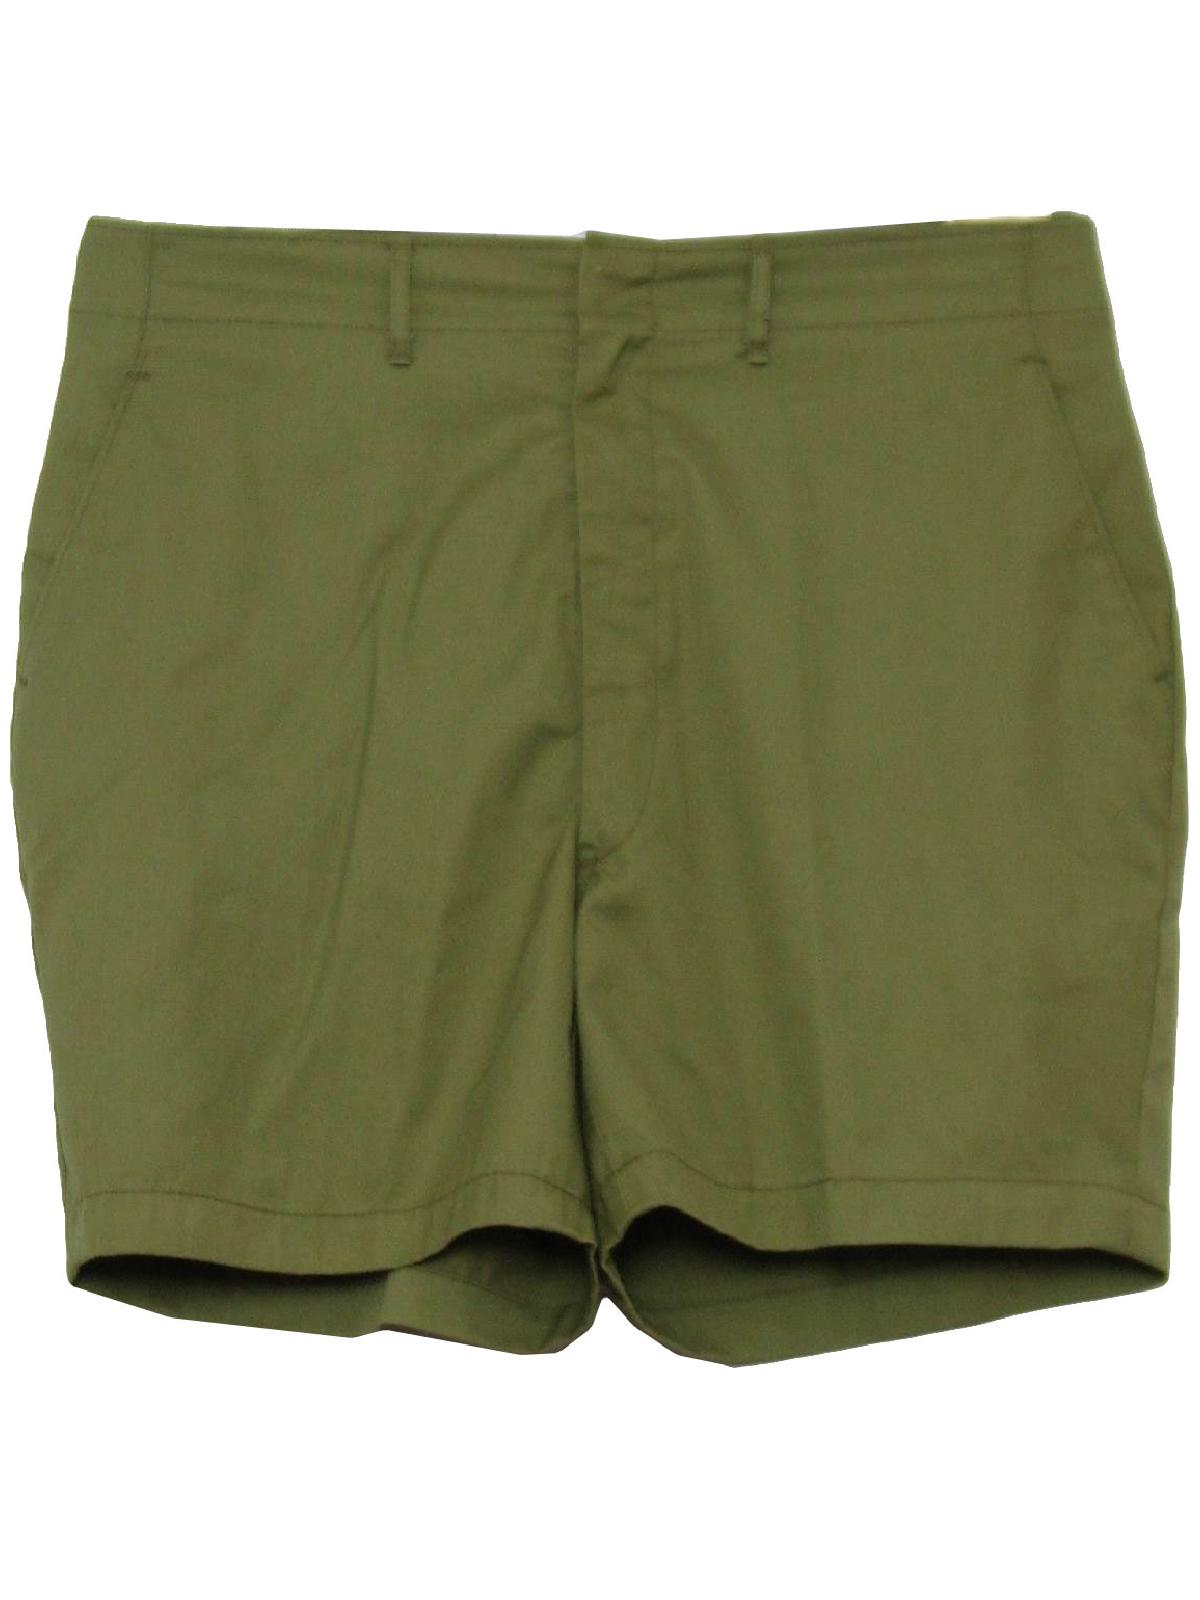 Sixties Vintage Shorts: 60s -Boy Scouts of America- Mens olive green ...